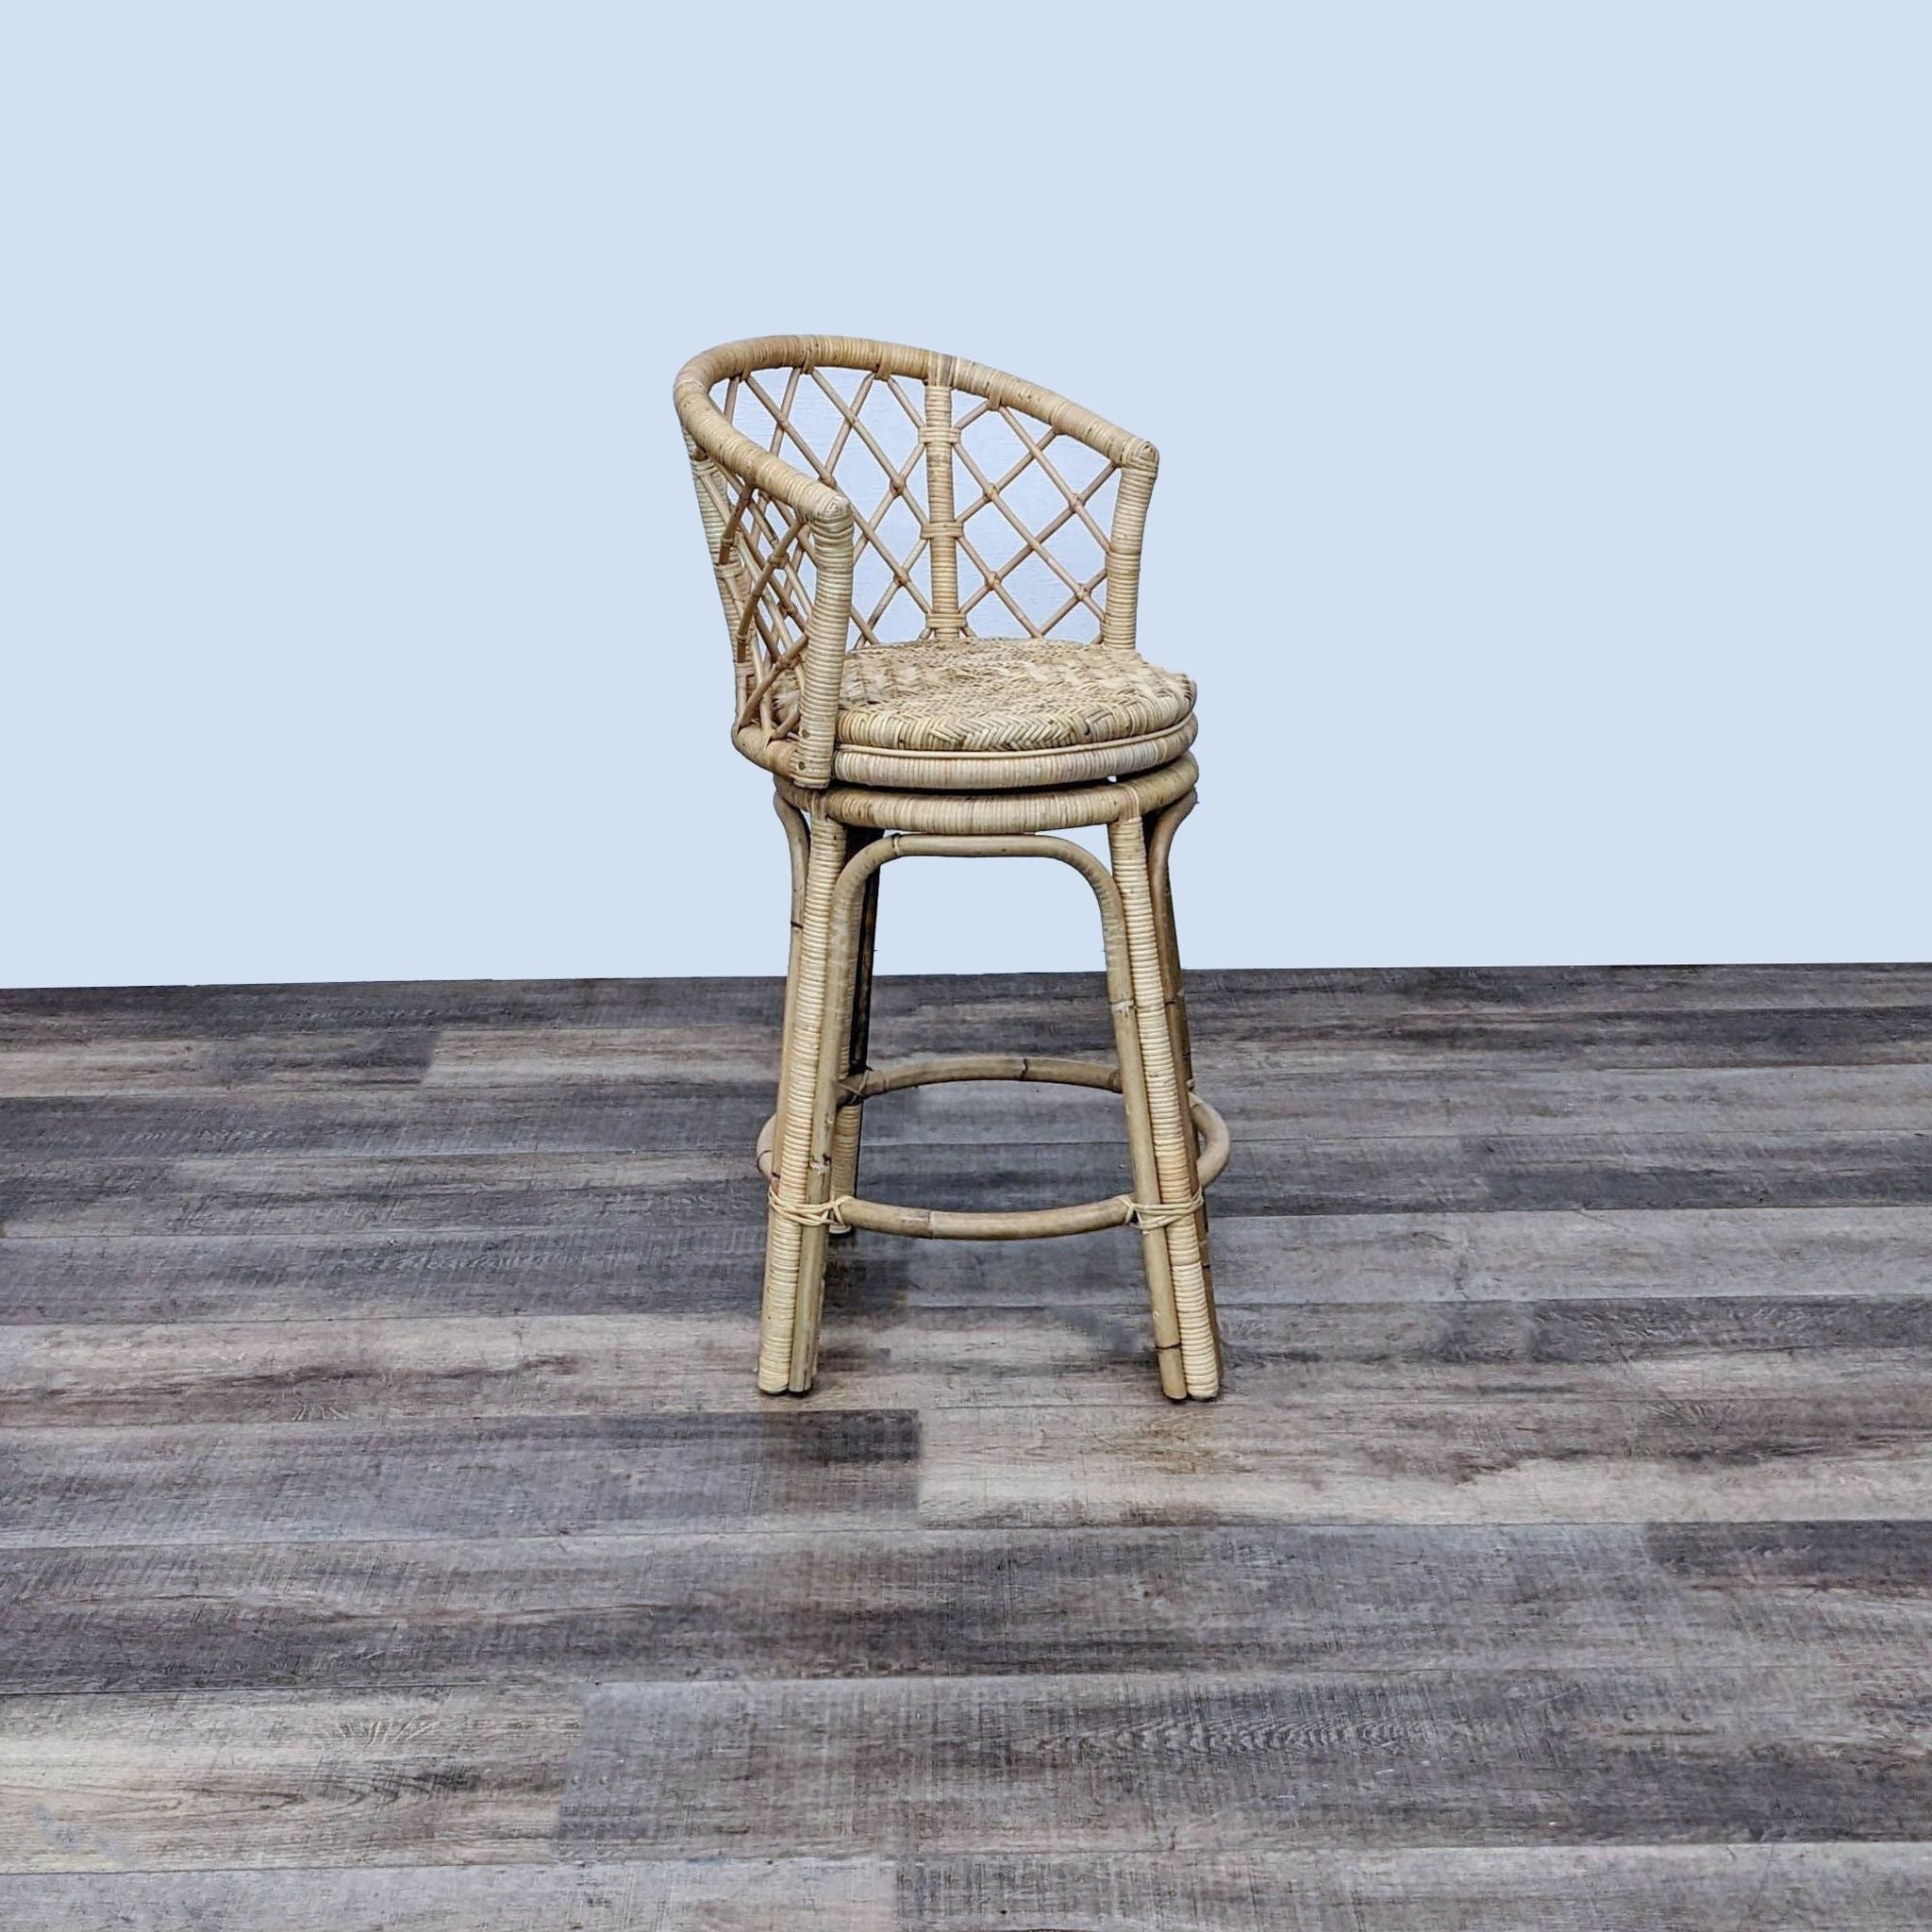 Natural-colored Rattan Swivel Stool by Serena and Lily with criss-cross back design.